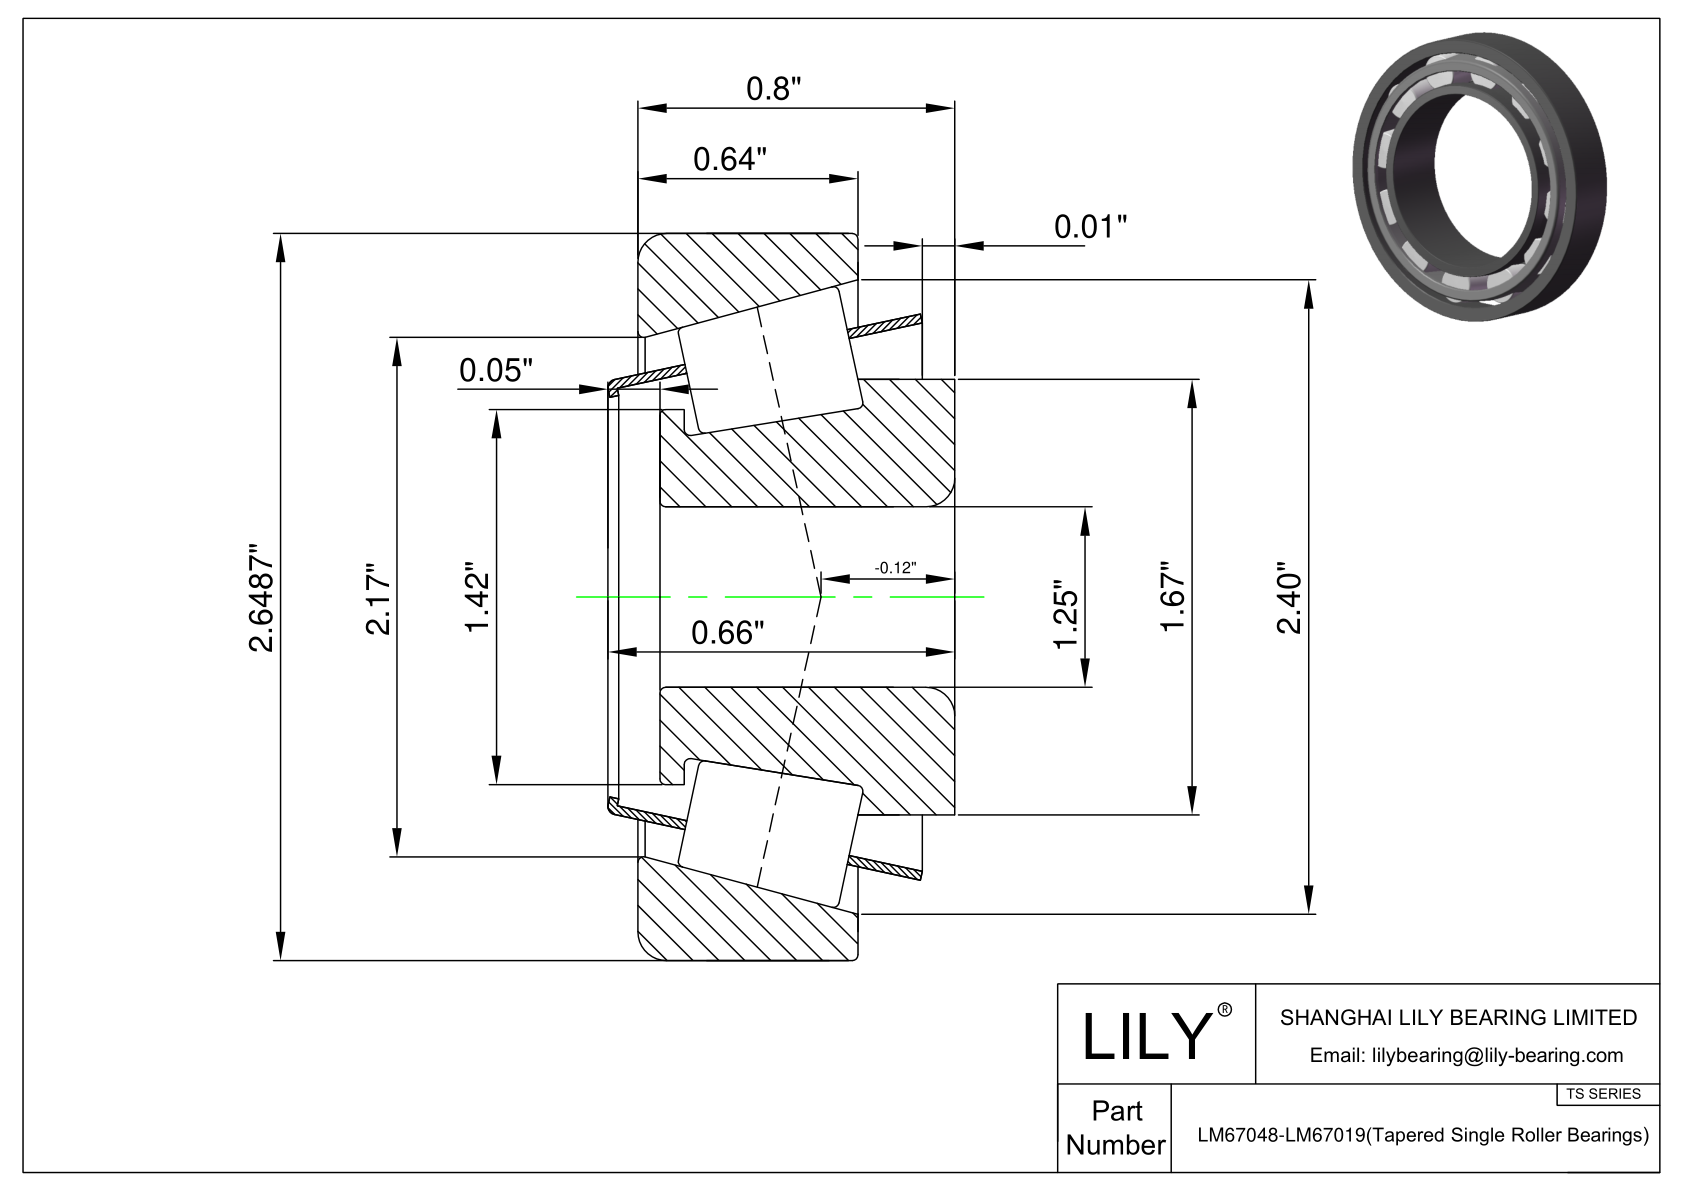 LM67048-LM67019 TS (Tapered Single Roller Bearings) (Imperial) cad drawing